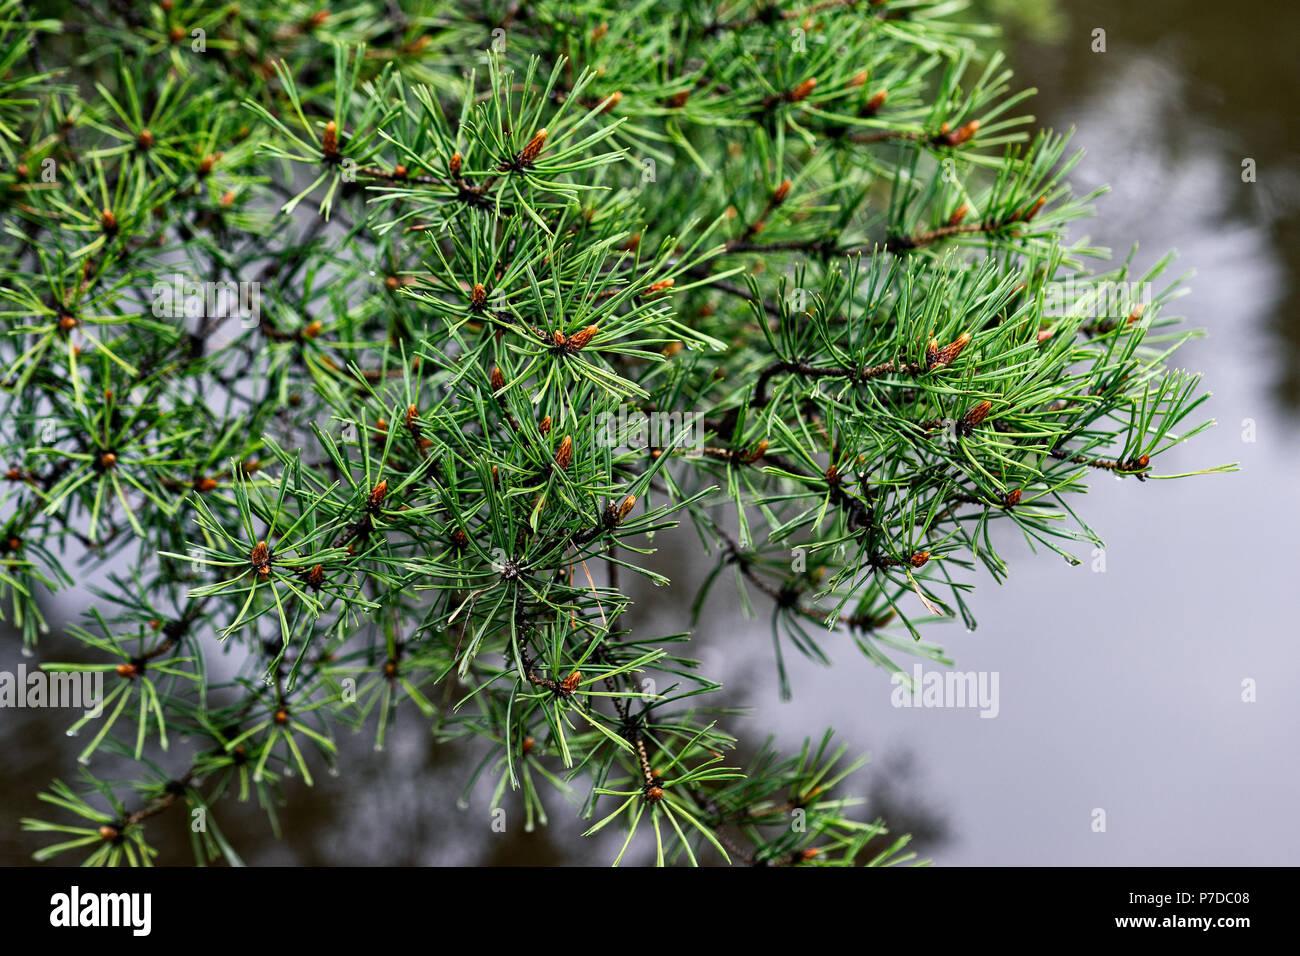 Decorative pine tree shoots with fresh green needles over the grey water of a park pond or river. Drops of rain on the needles. Rainy day of spring se Stock Photo